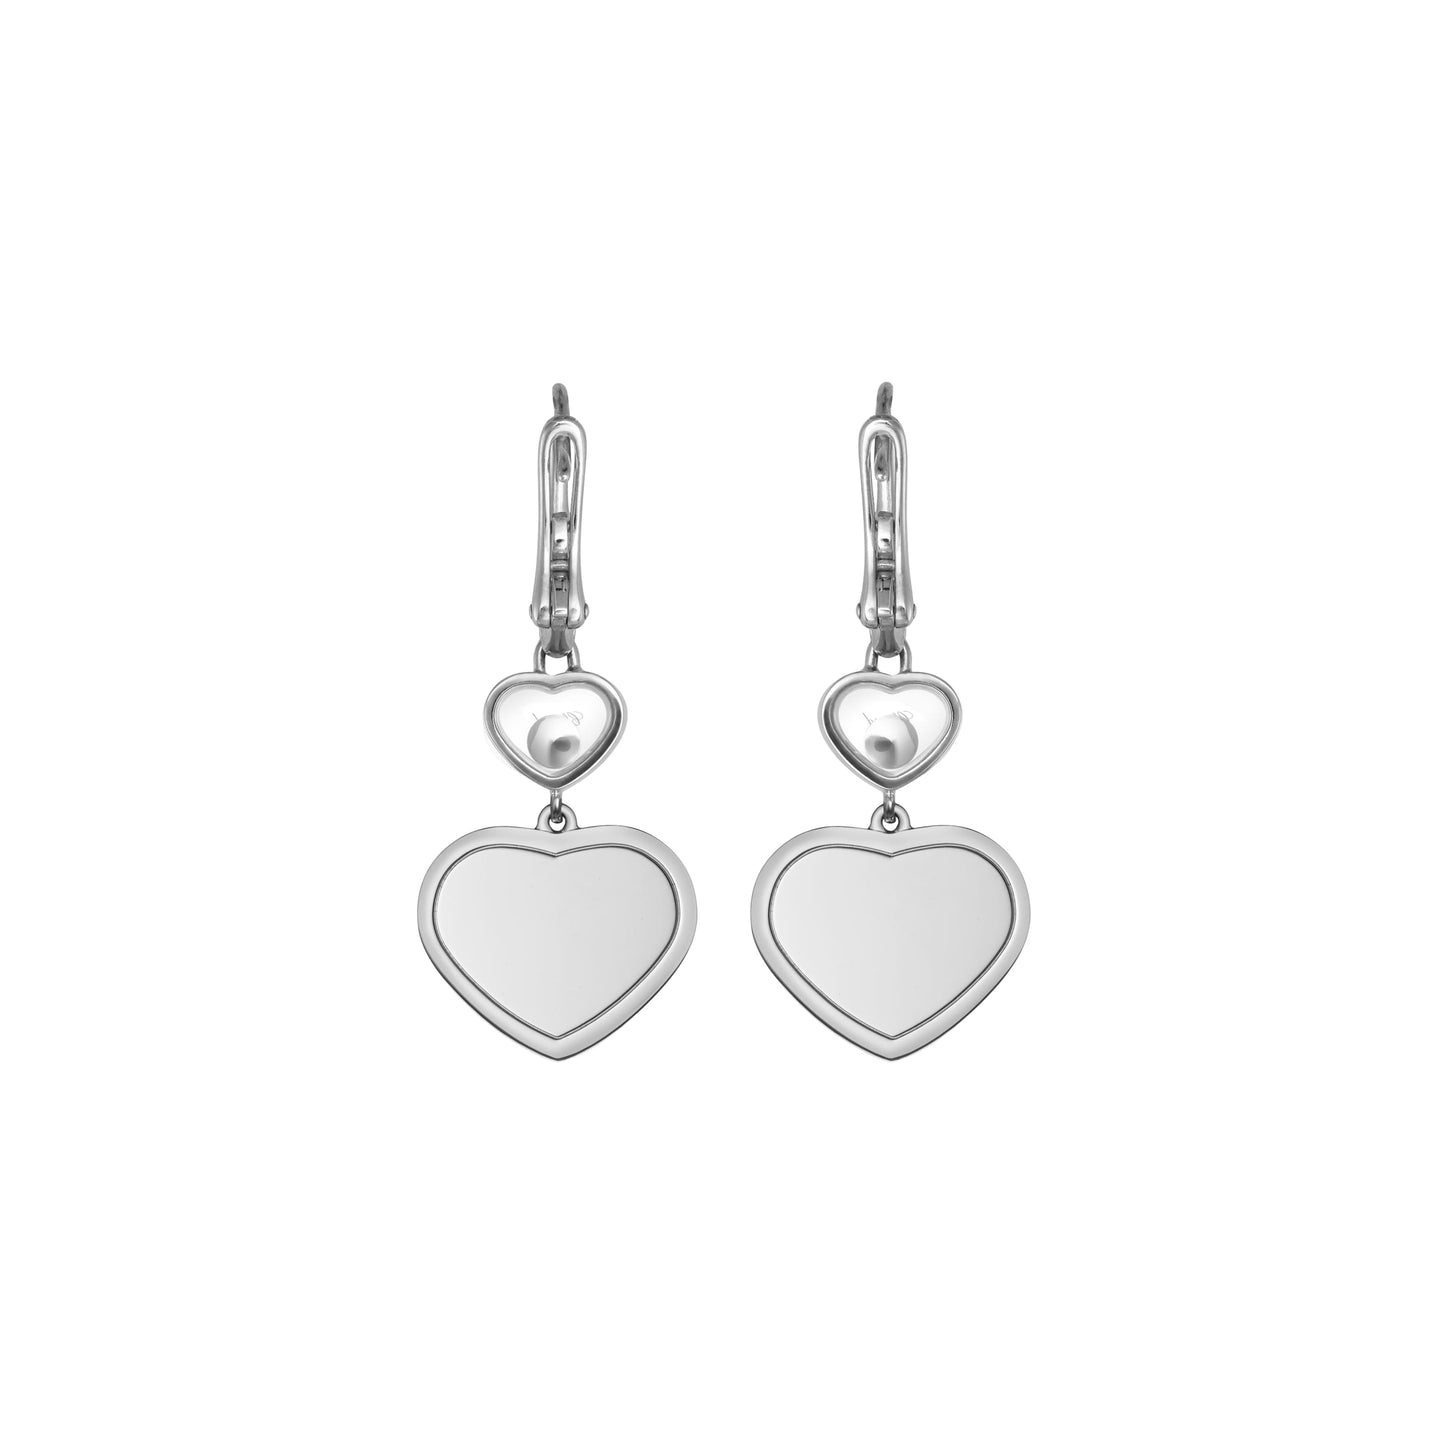 HAPPY HEARTS EARRINGS, ETHICAL WHITE GOLD, DIAMONDS 837482-1009